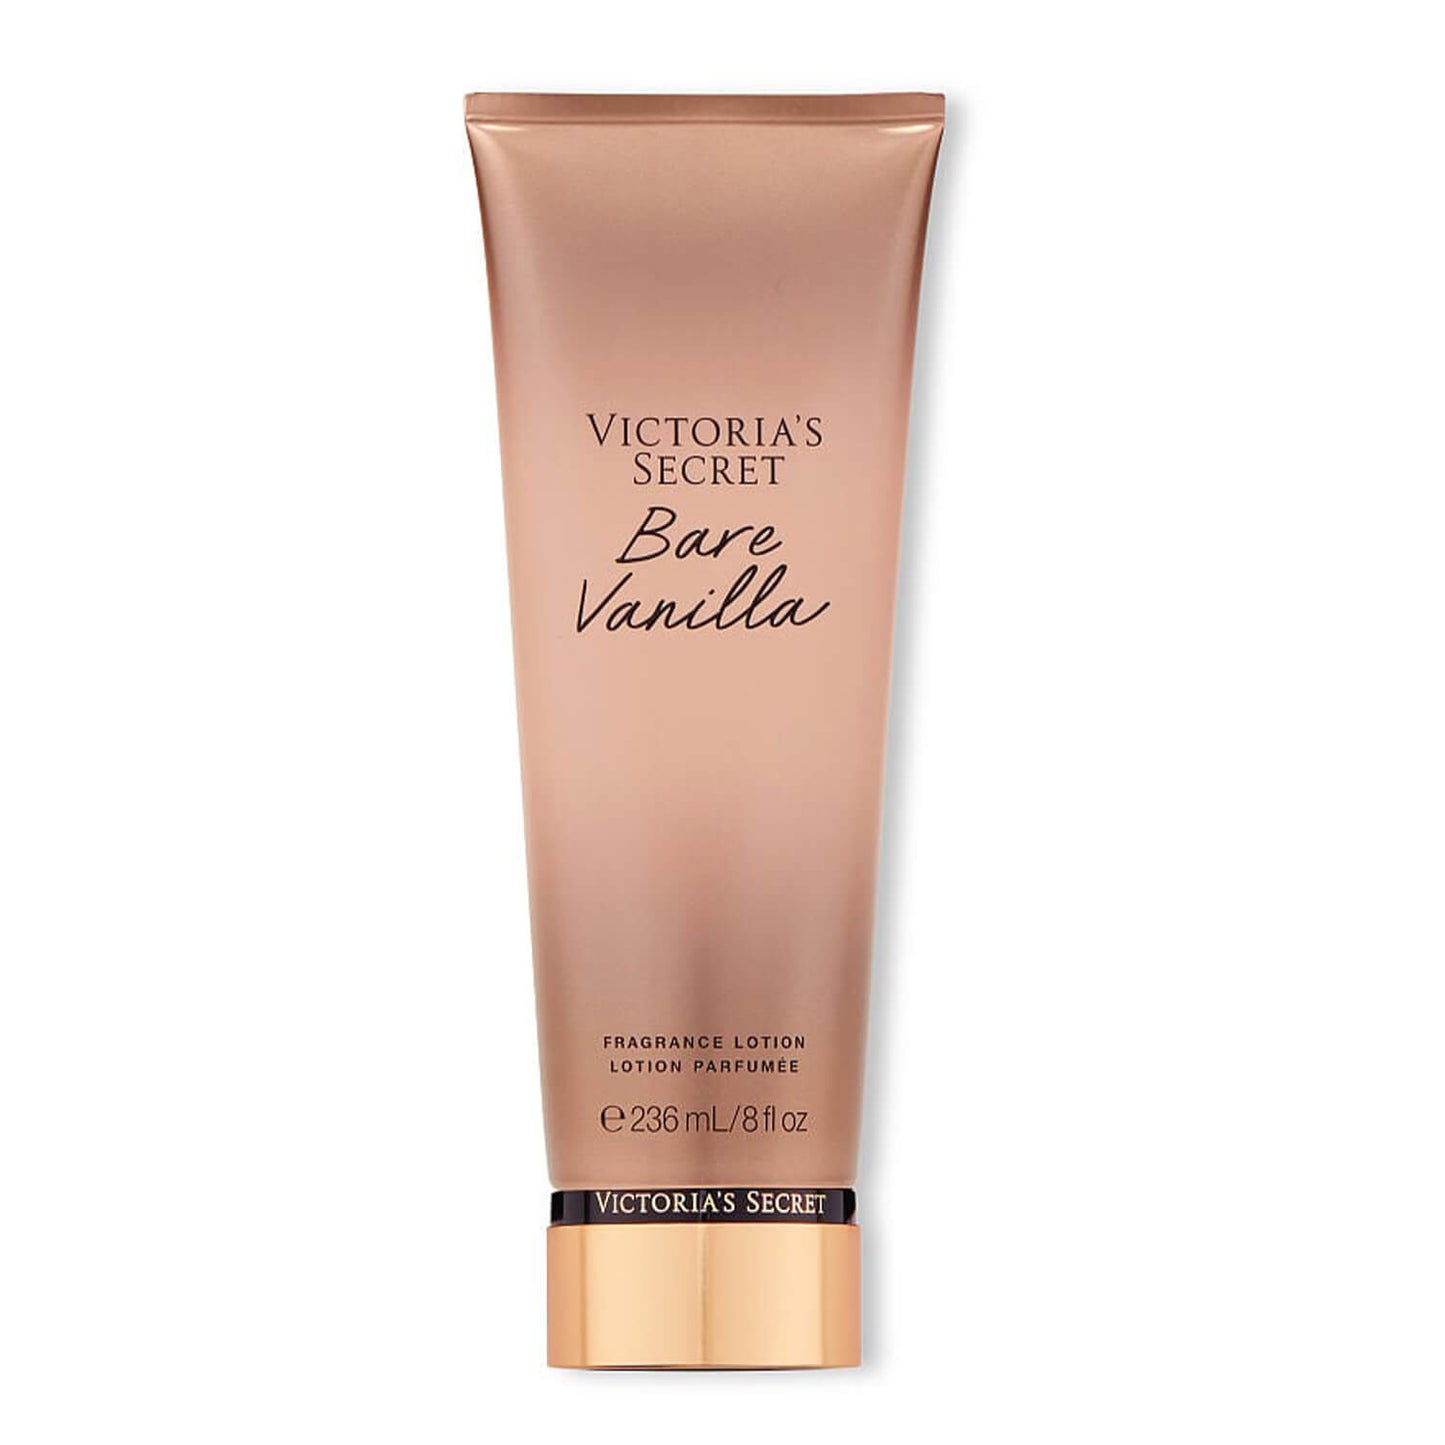 Shop 100%  original Victoria's Secret Fragrance Lotion in Bare Vanilla available at Heygirl.pk for delivery in Pakistan